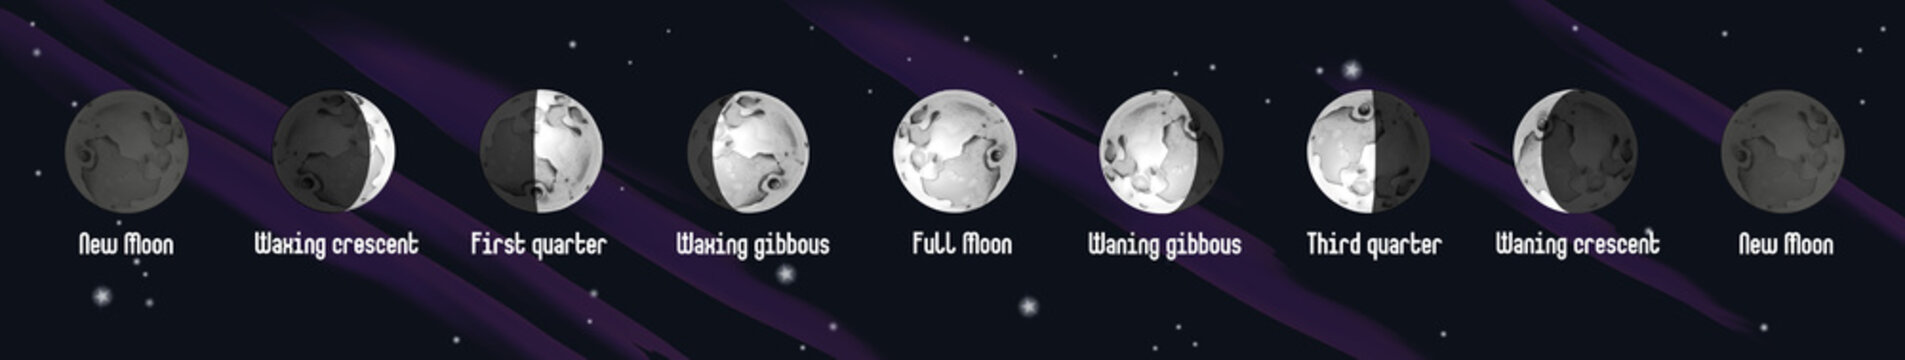 Phases of Moon, vector illustration